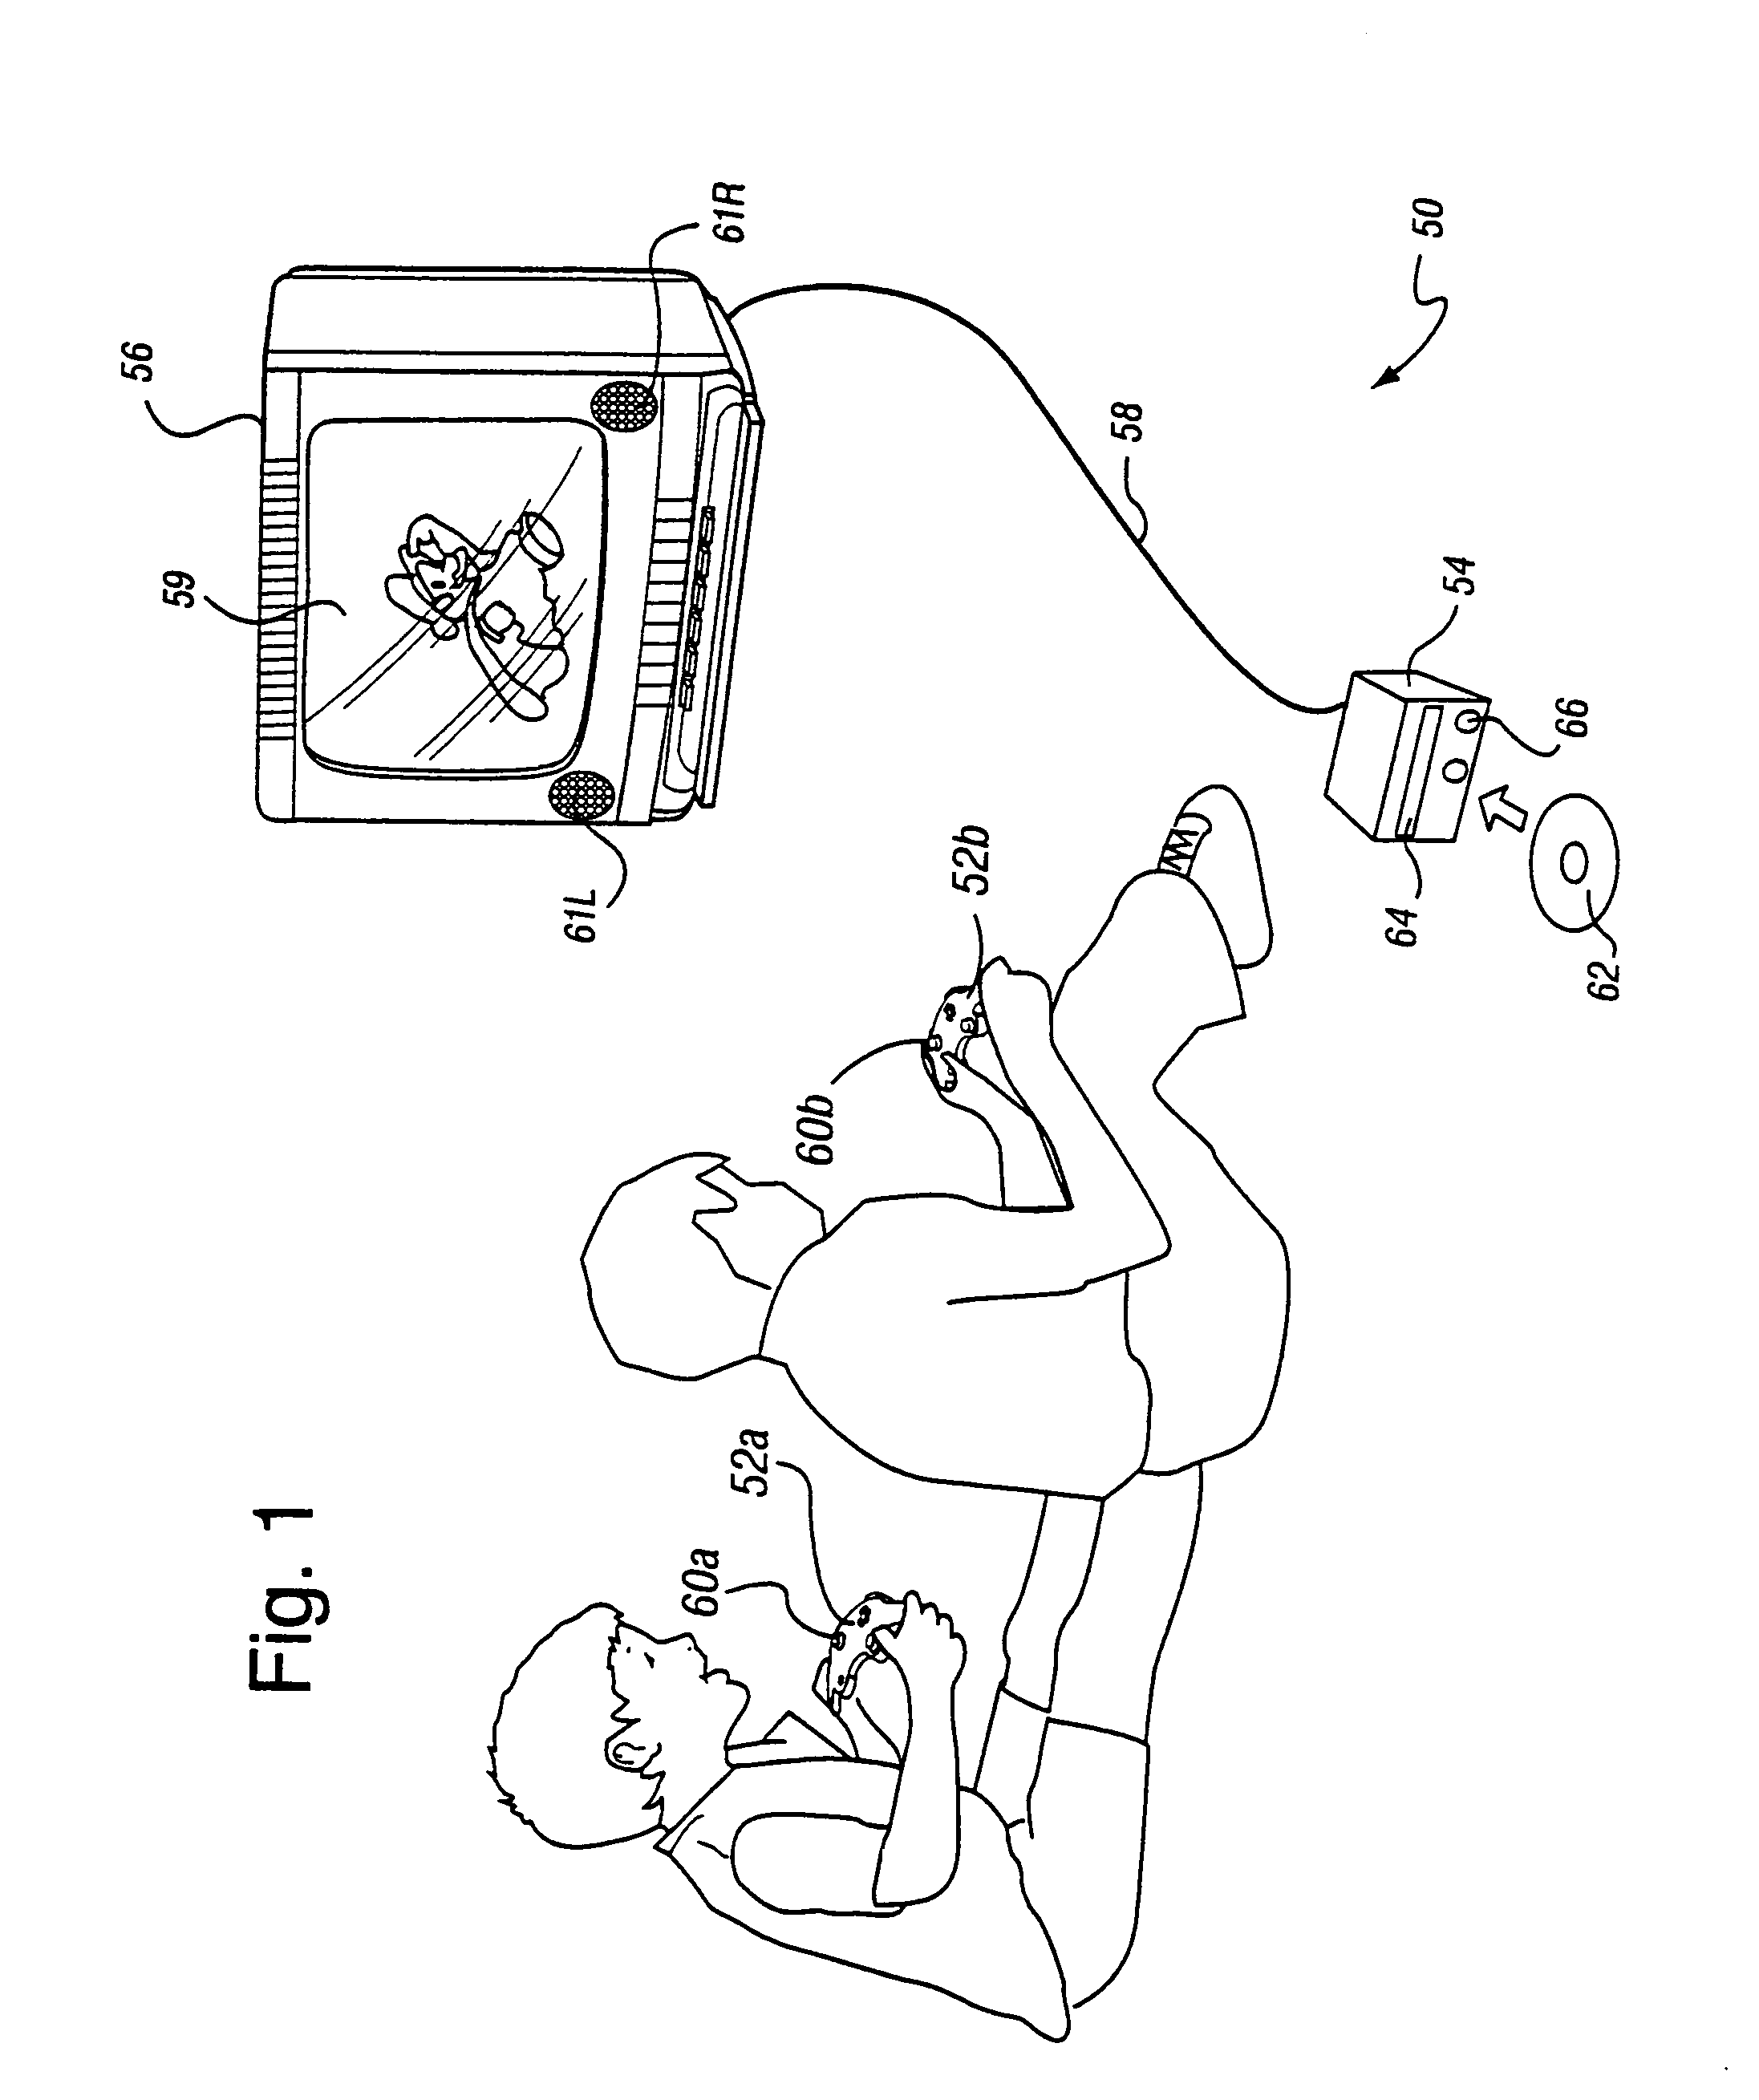 Method and apparatus for anti-aliasing in a graphics system